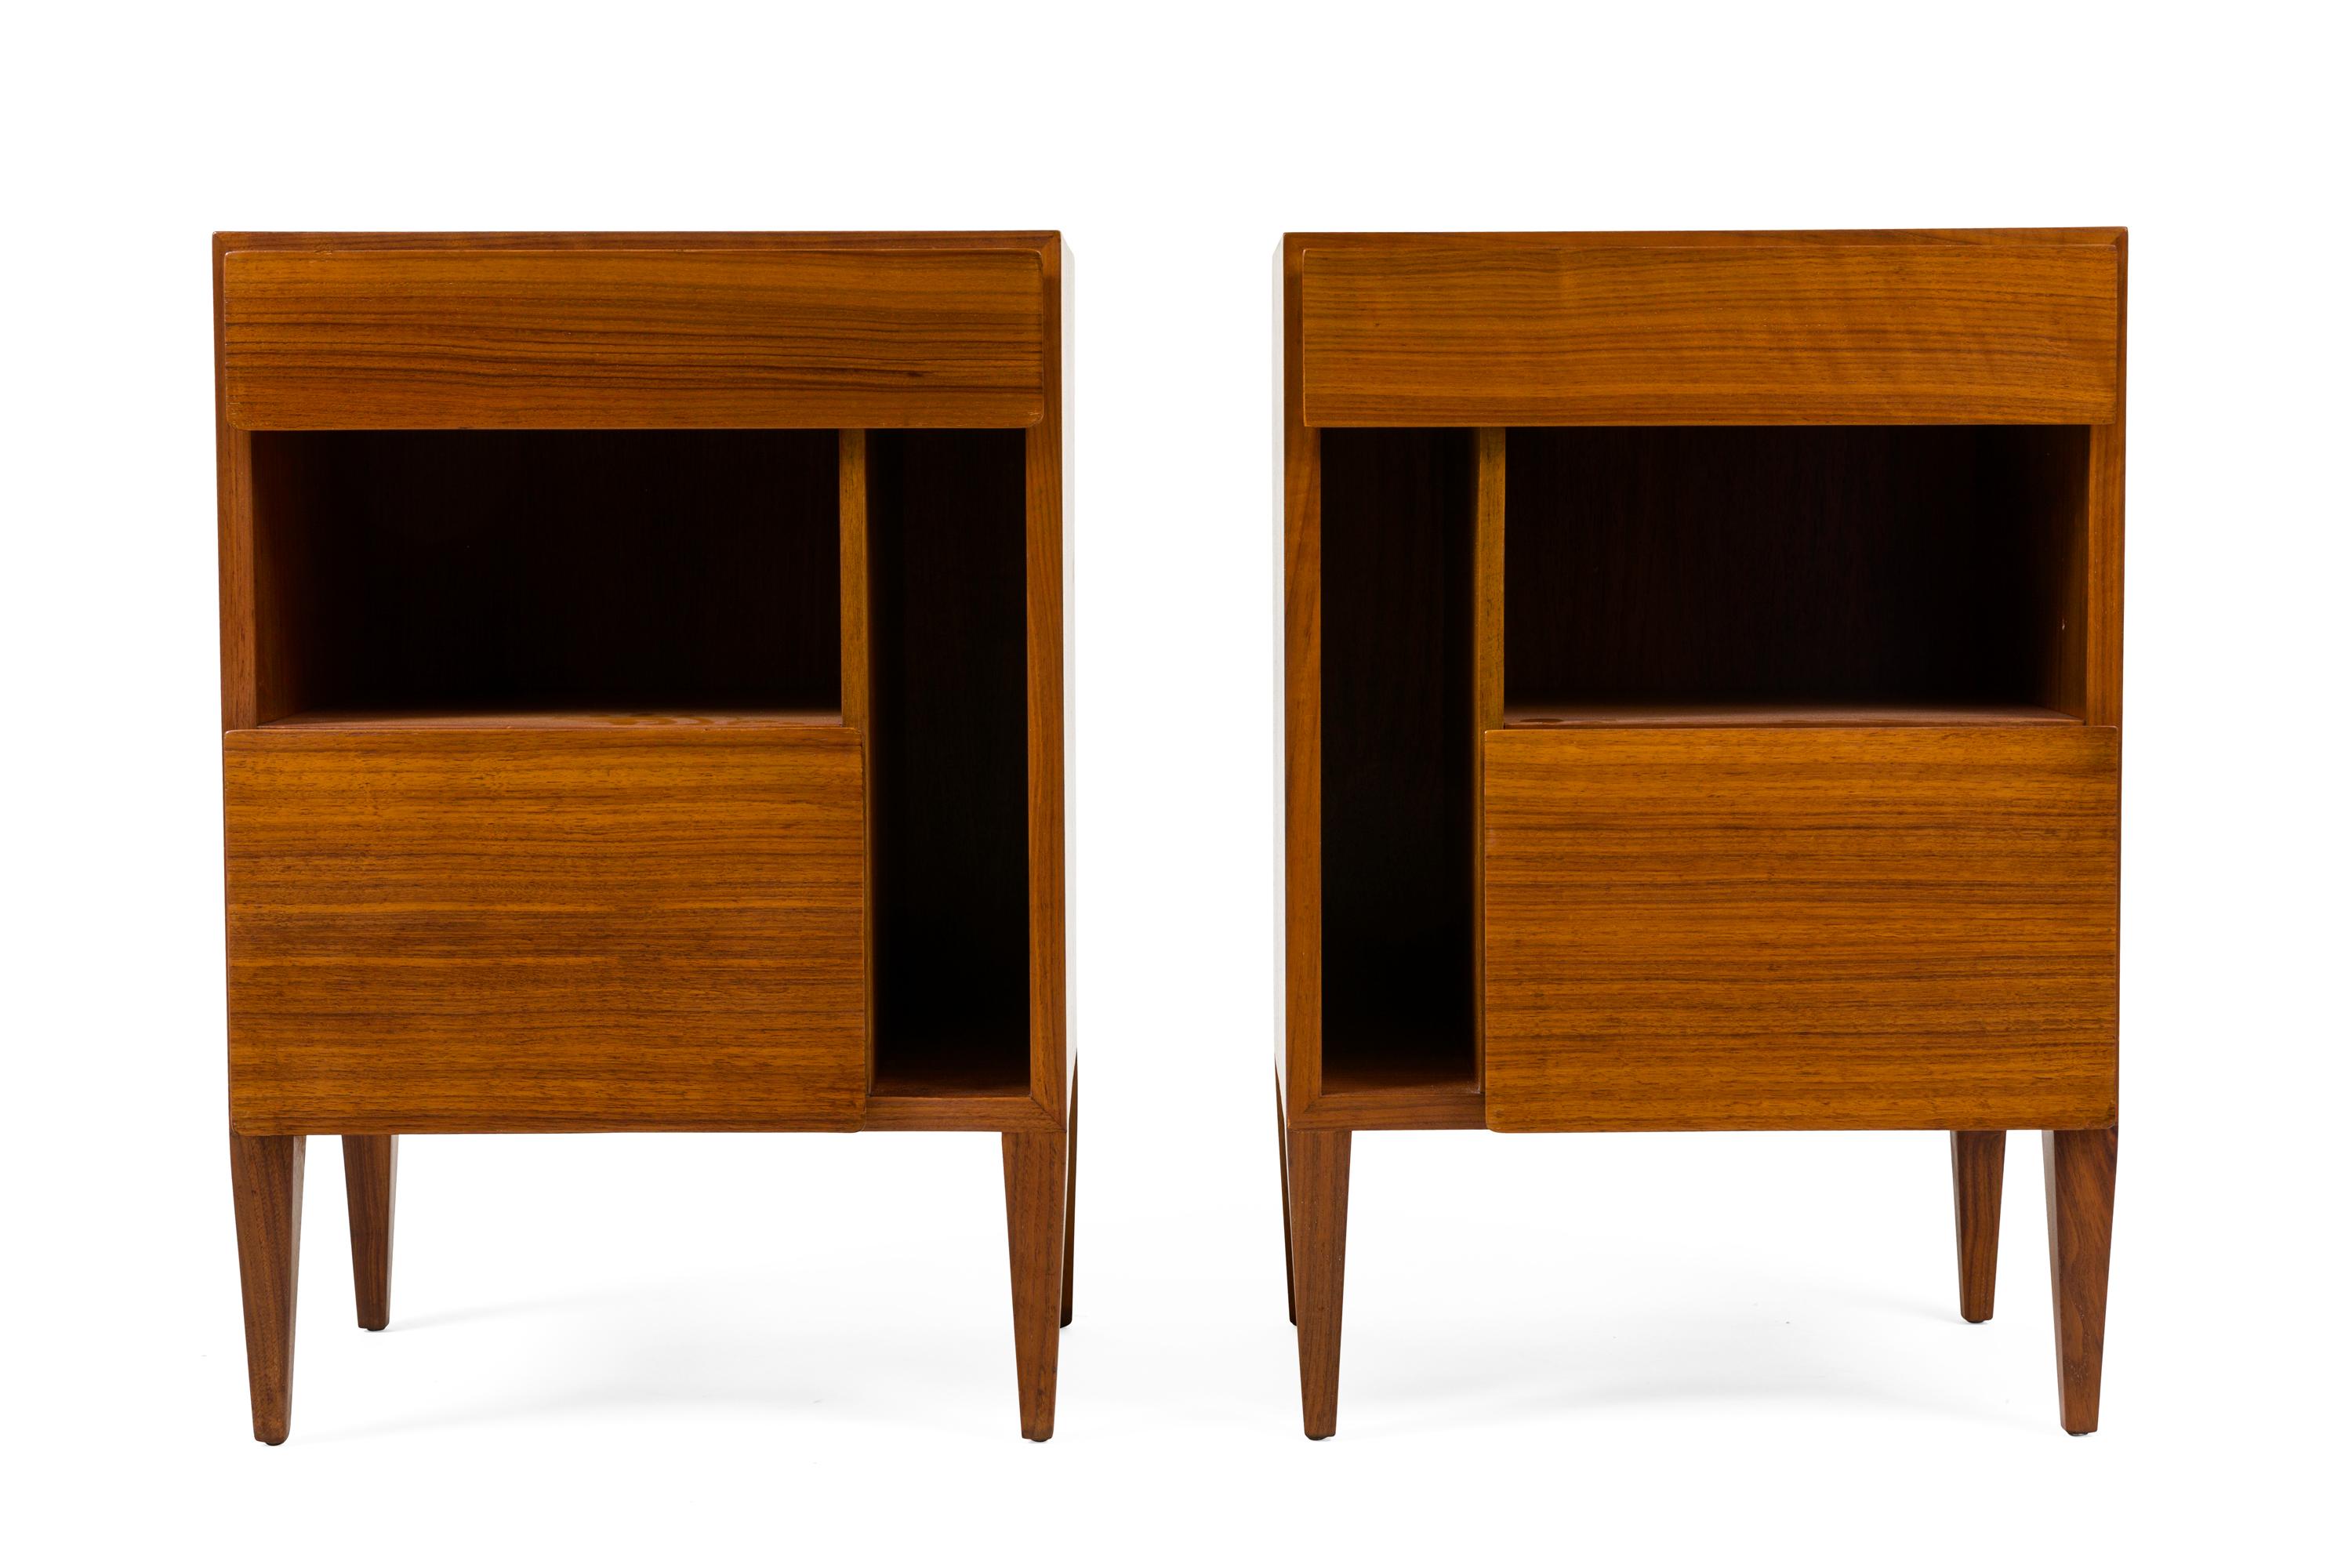 An outstanding pair of nightstands by Gio Ponti. They feature one drawer and one door concealing storage.